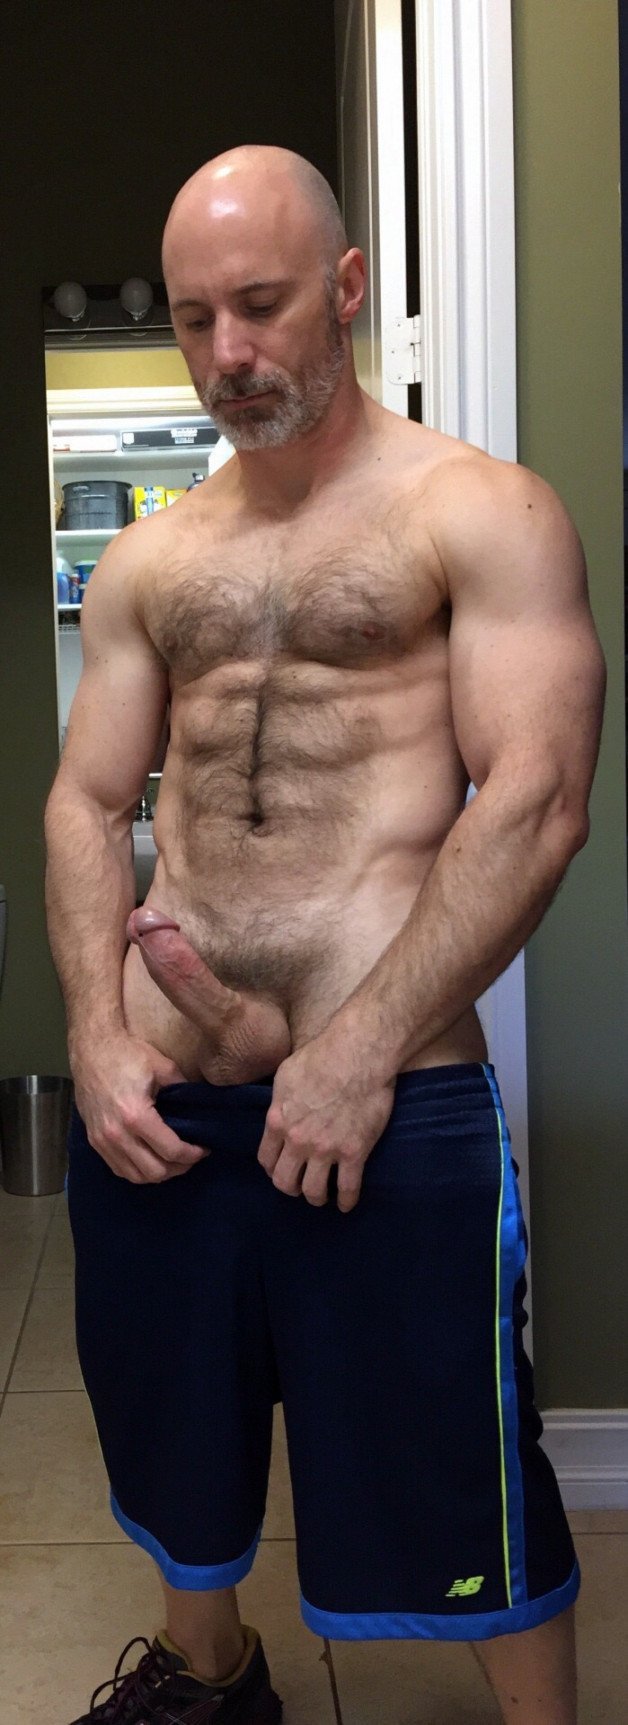 Photo by Smitty with the username @Resol702,  January 30, 2021 at 5:10 PM. The post is about the topic Gay Hairy Men